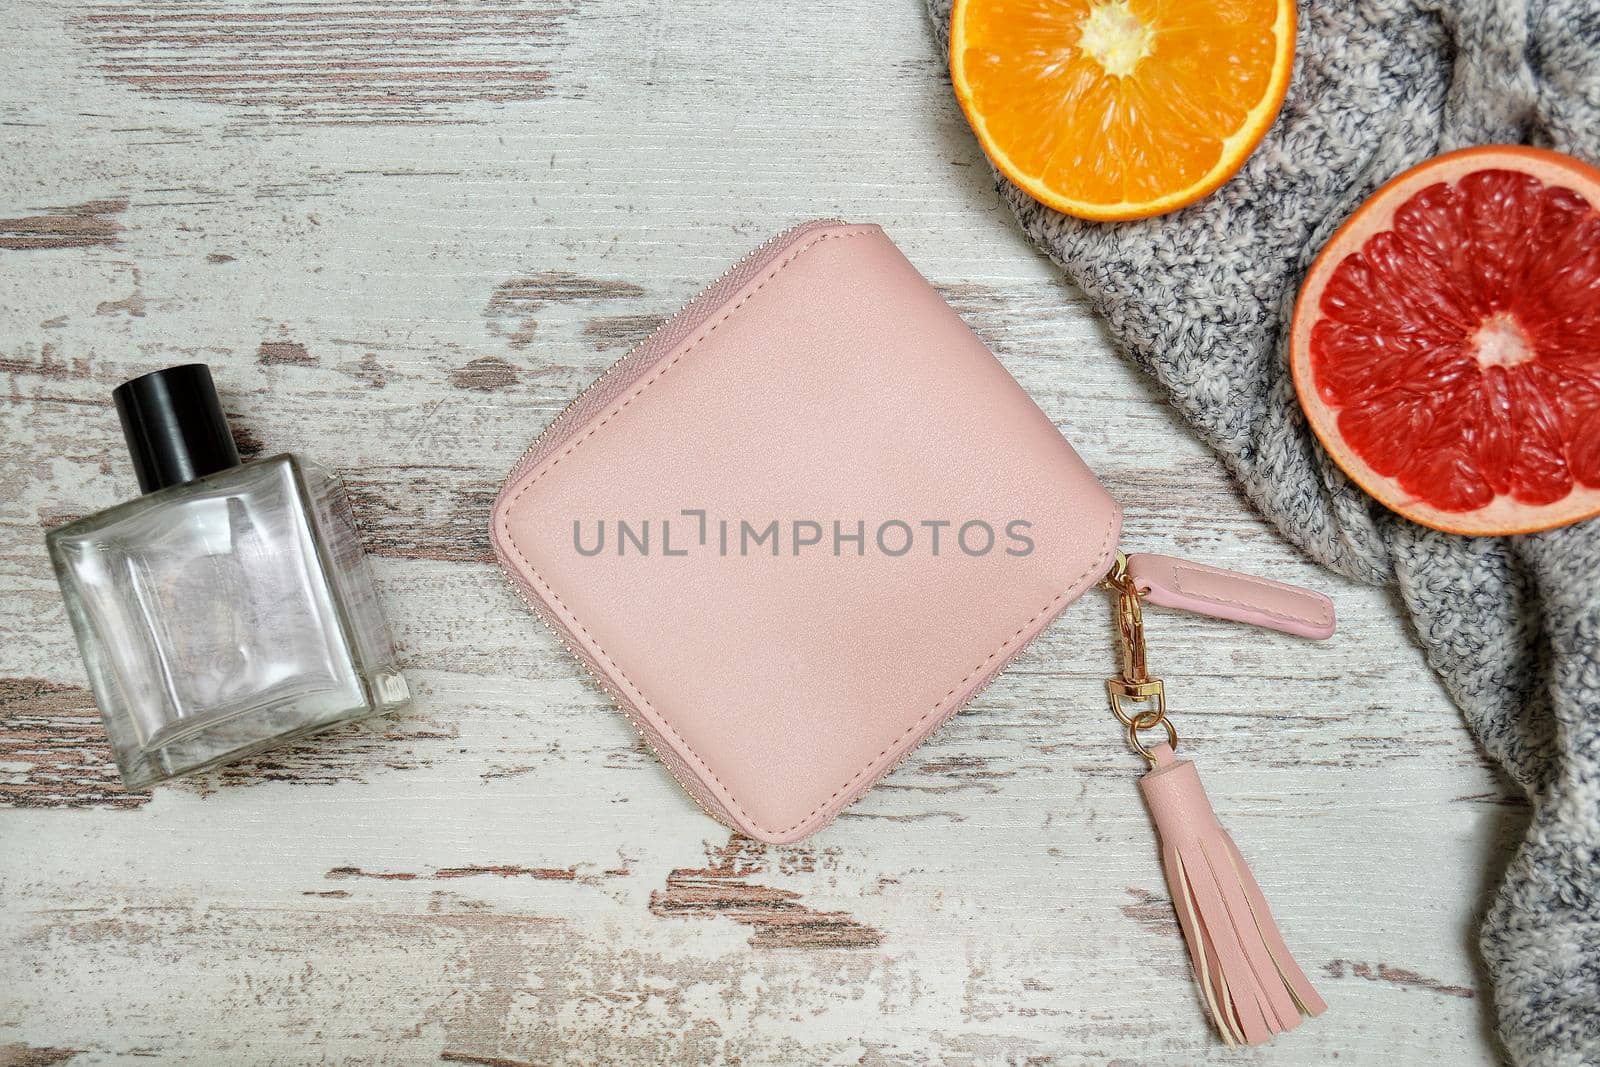 Little pink female purse, perfume and citrus on a wooden background. Fashionable concept.